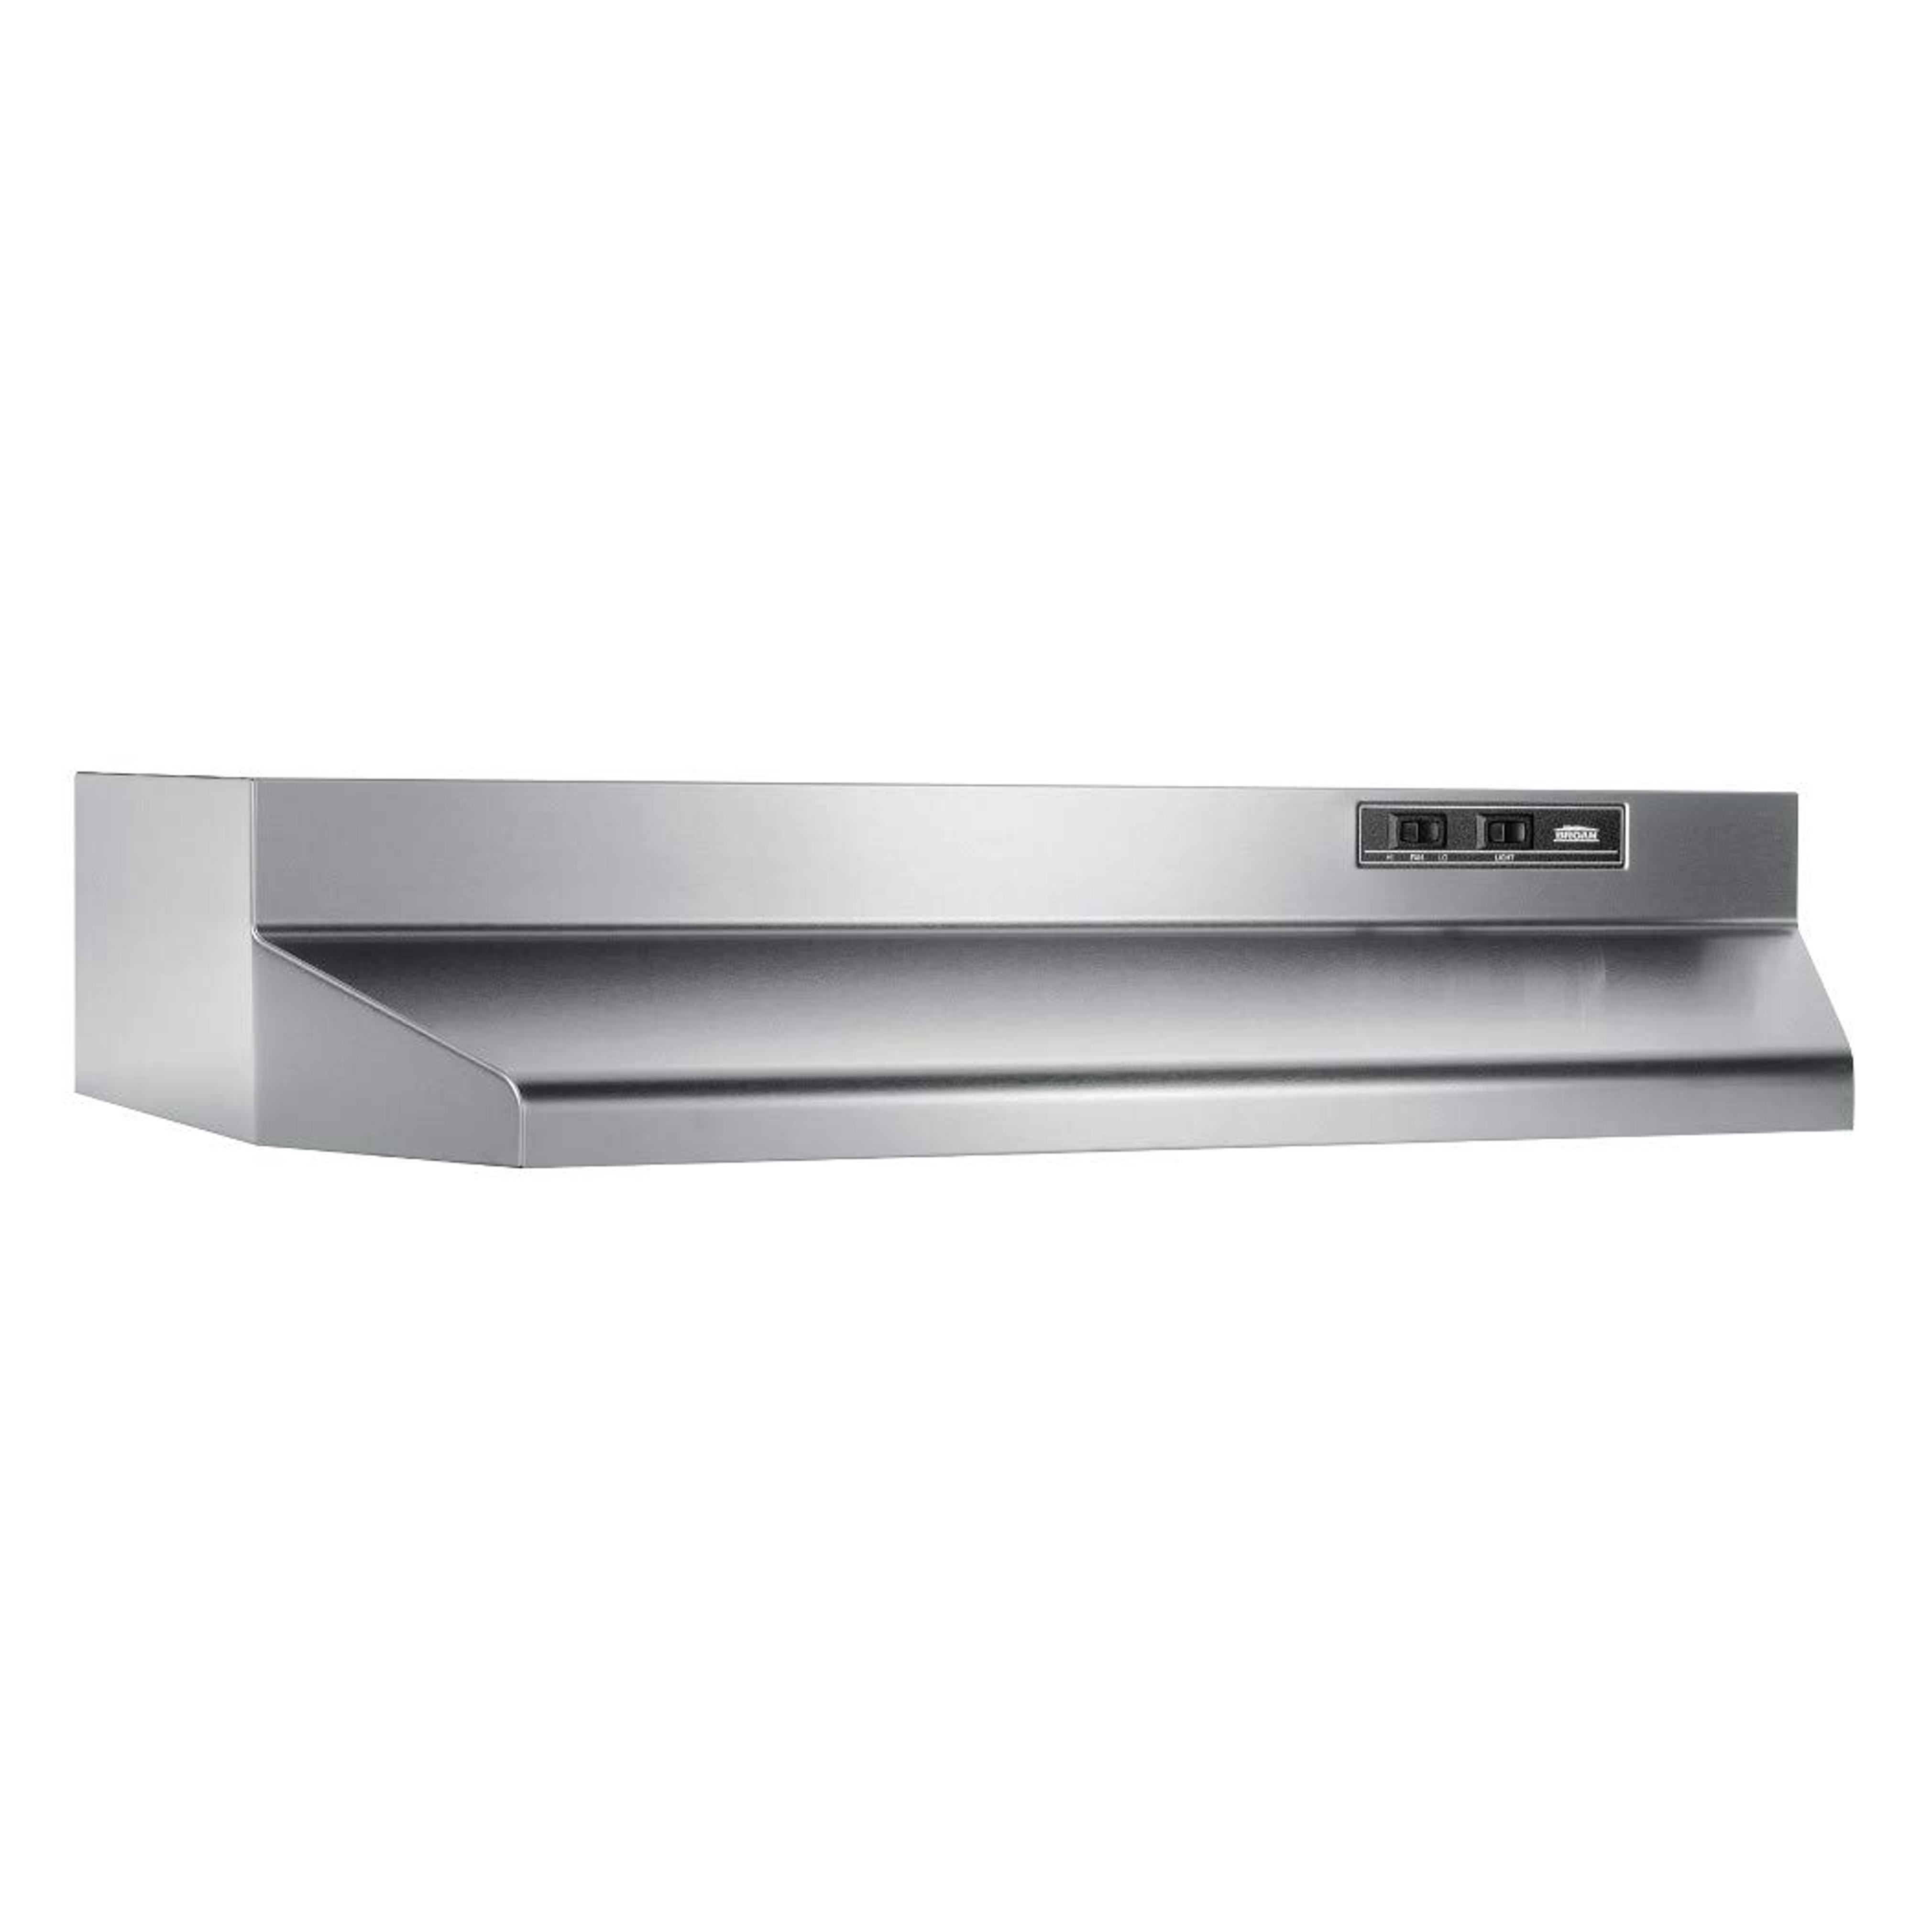 Broan- NuTone 403004 Under- Cabinet Ducted Range Hood with 2-Speed Exhaust Fan and Light, 30-inch, Stainless Steel